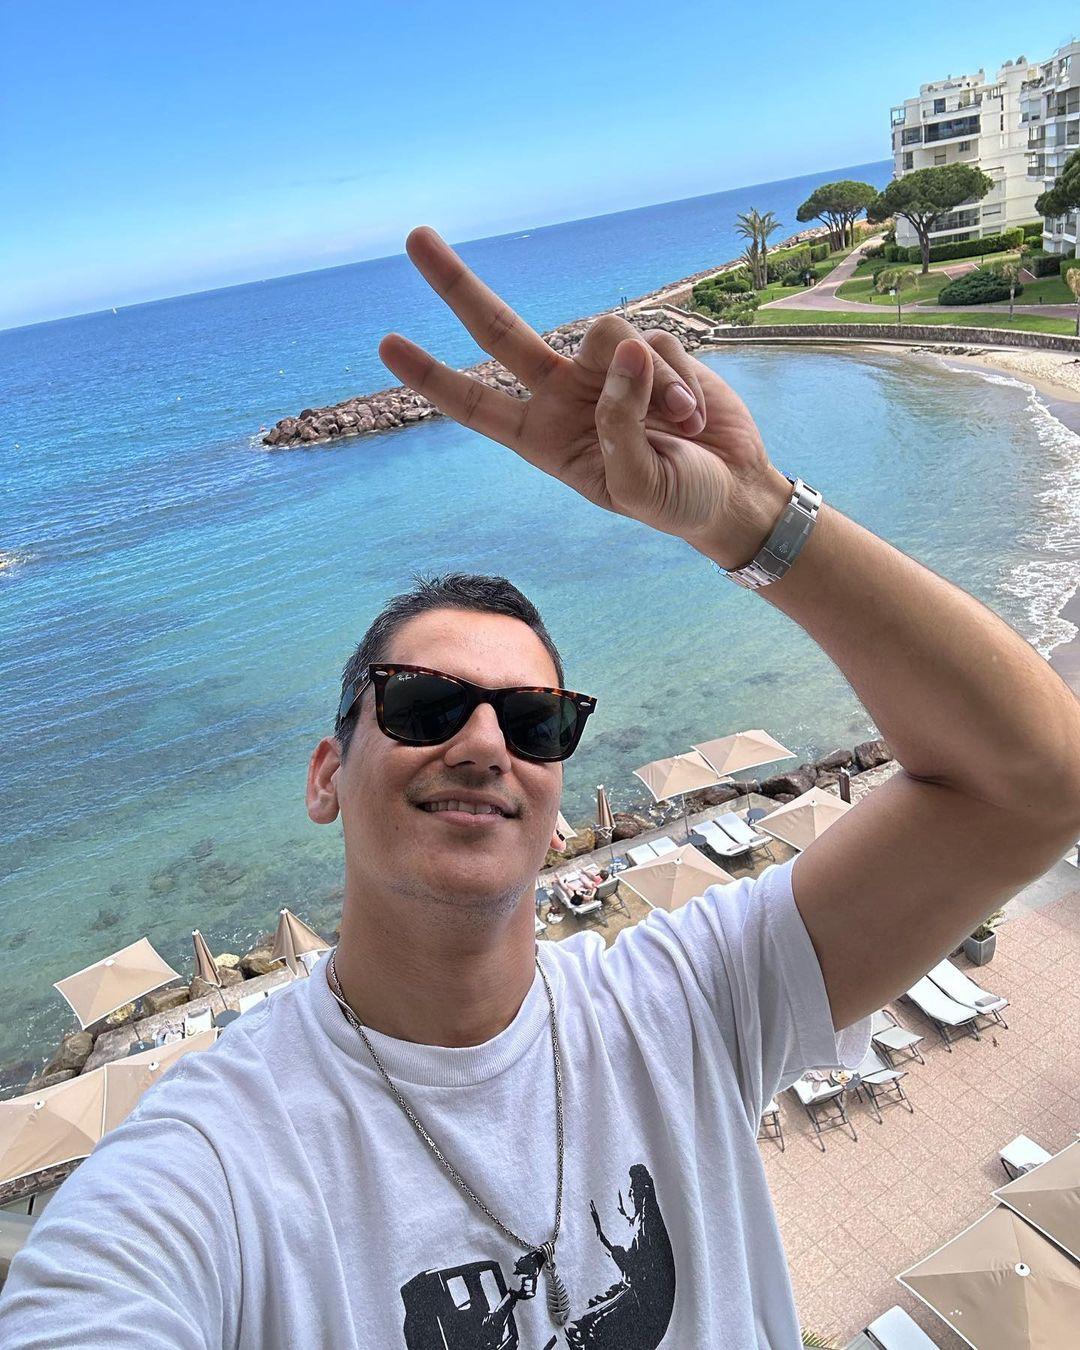 Vijay Varma, who is basking in the success of 'Dahaad', is currently in France for the 2023 Cannes Film Festival and has shared adorable selfies from the beautiful landscapes of France in the background.